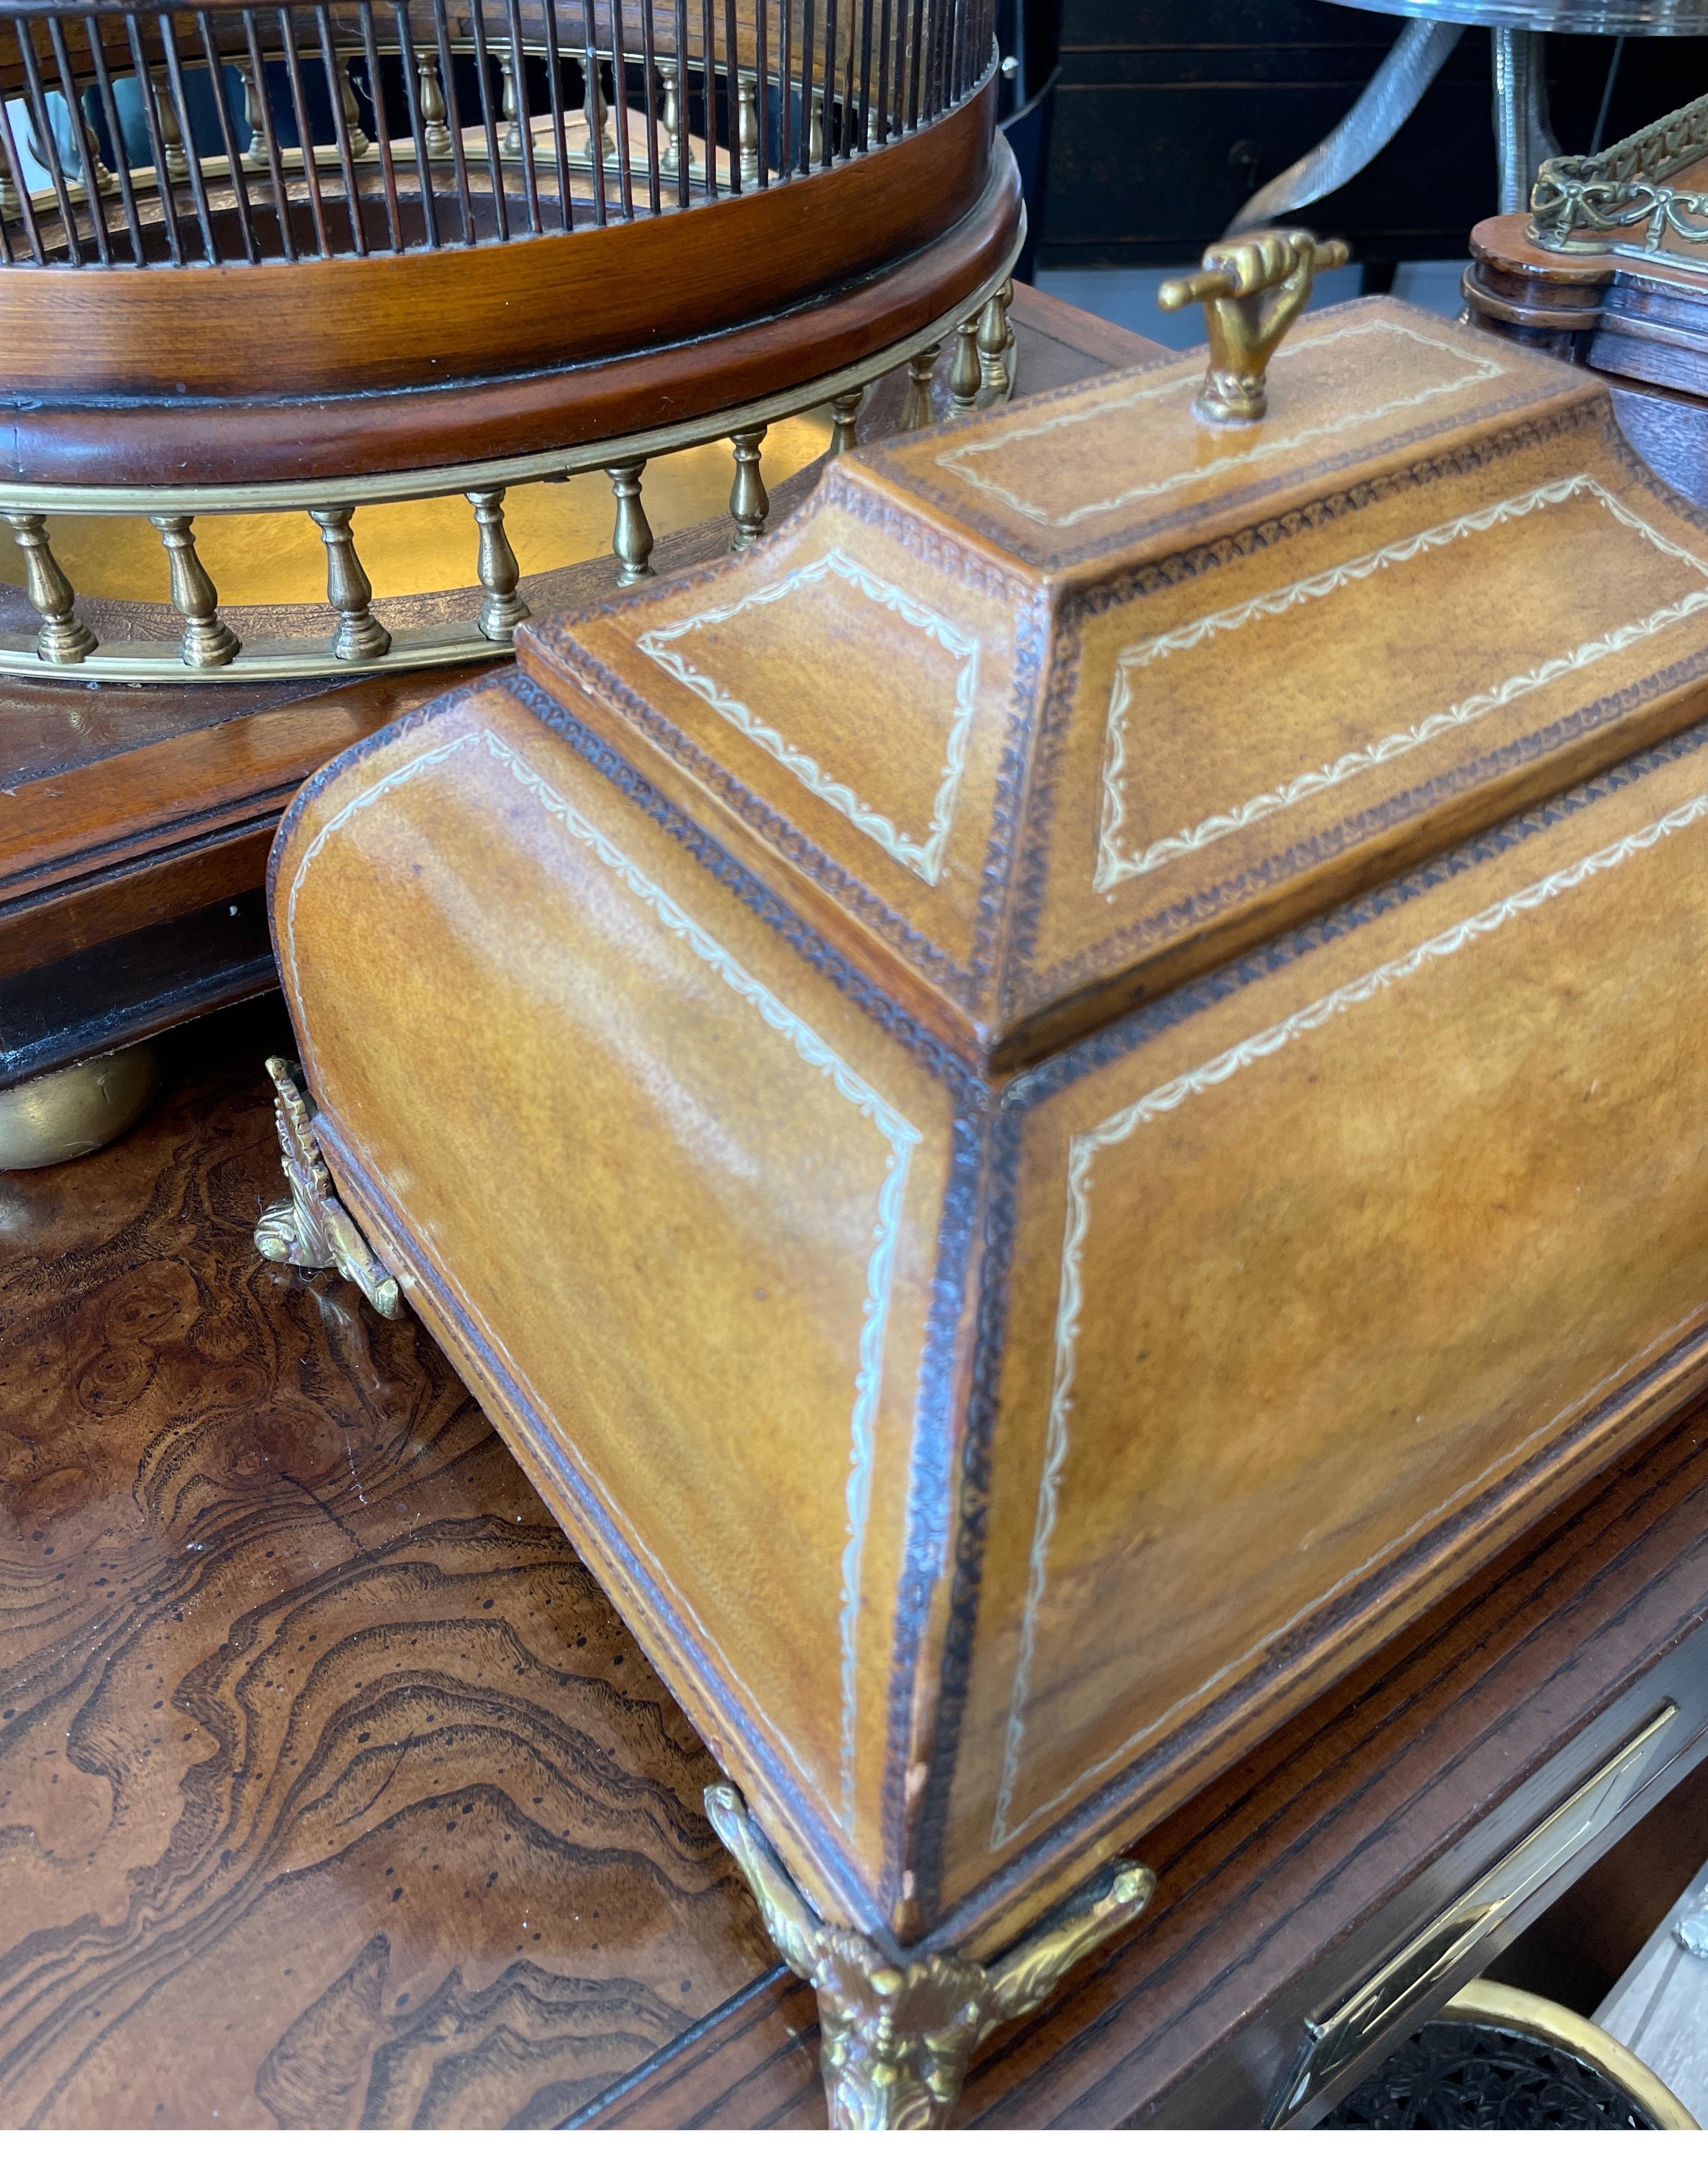 Very decorative tooled leather box with brass feet & trim. Handle is a clasped brass hand. This box opens to a finished interior with ample storage space.